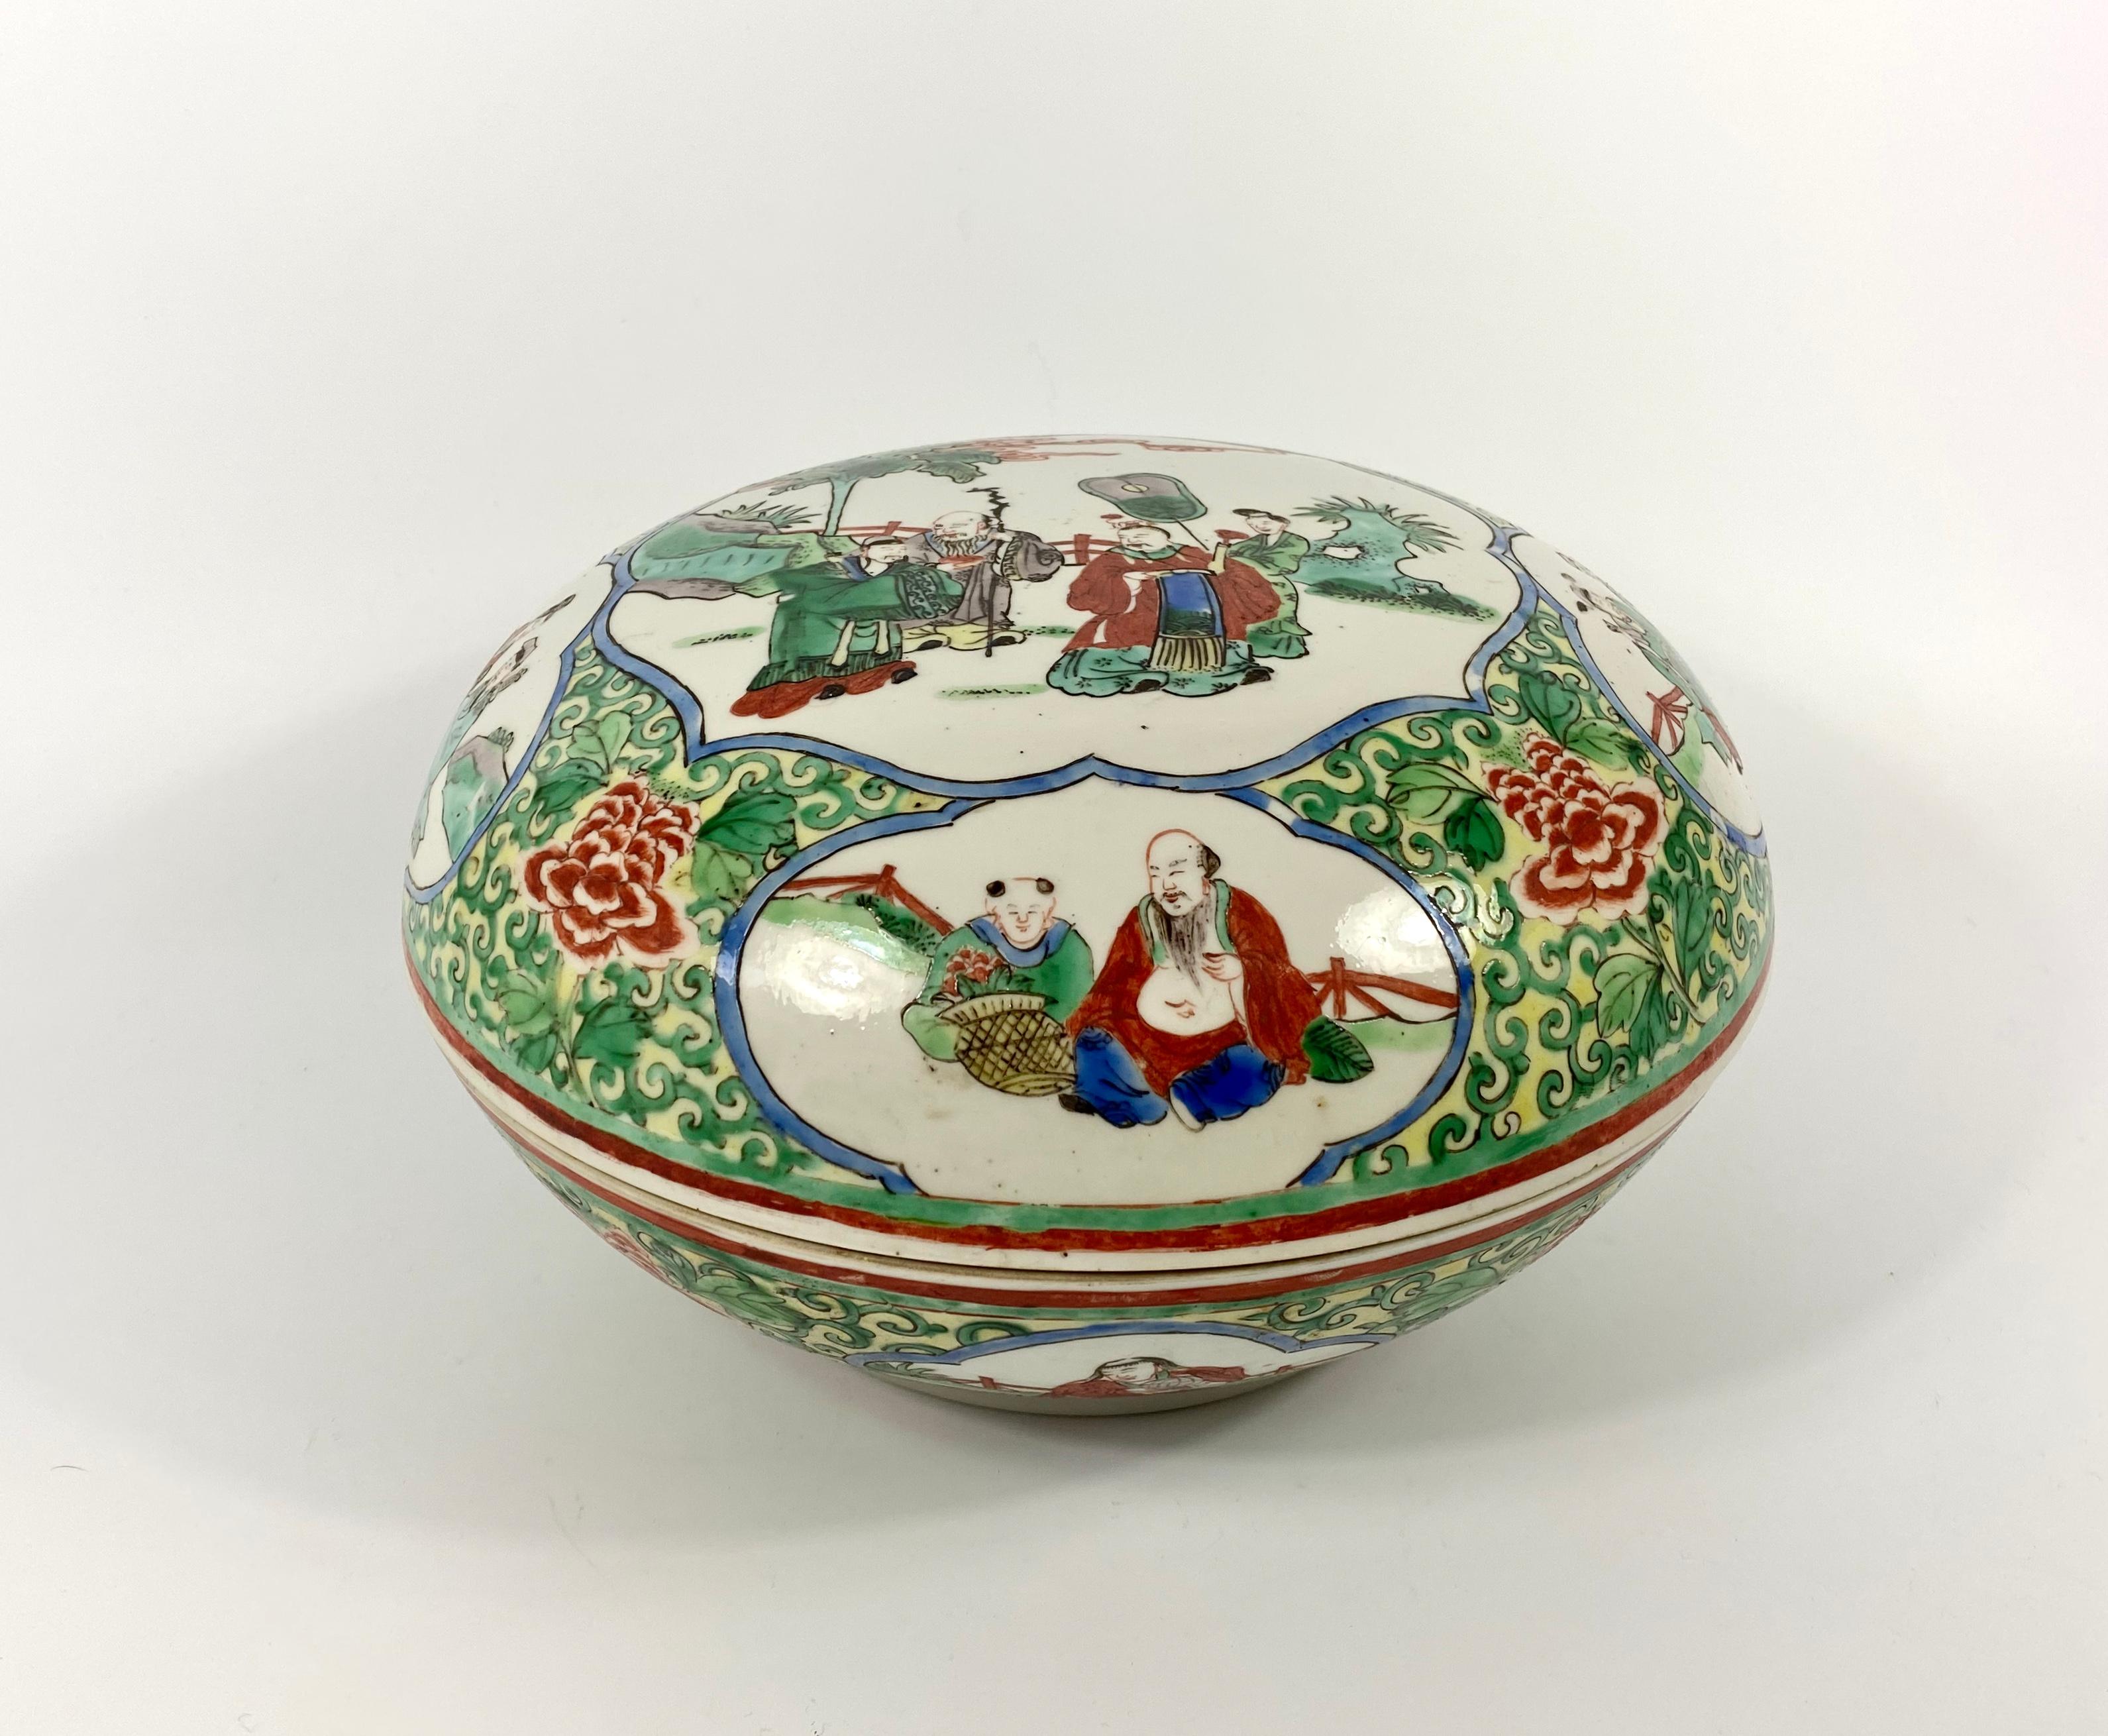 Chinese porcelain box and cover of large size, circa 1900. Qing Dynasty. Hand painted to the cover in wucai or famille verte enamels with panels containing the Immortals in garden settings. All upon a dense ground of green scrollwork and flower